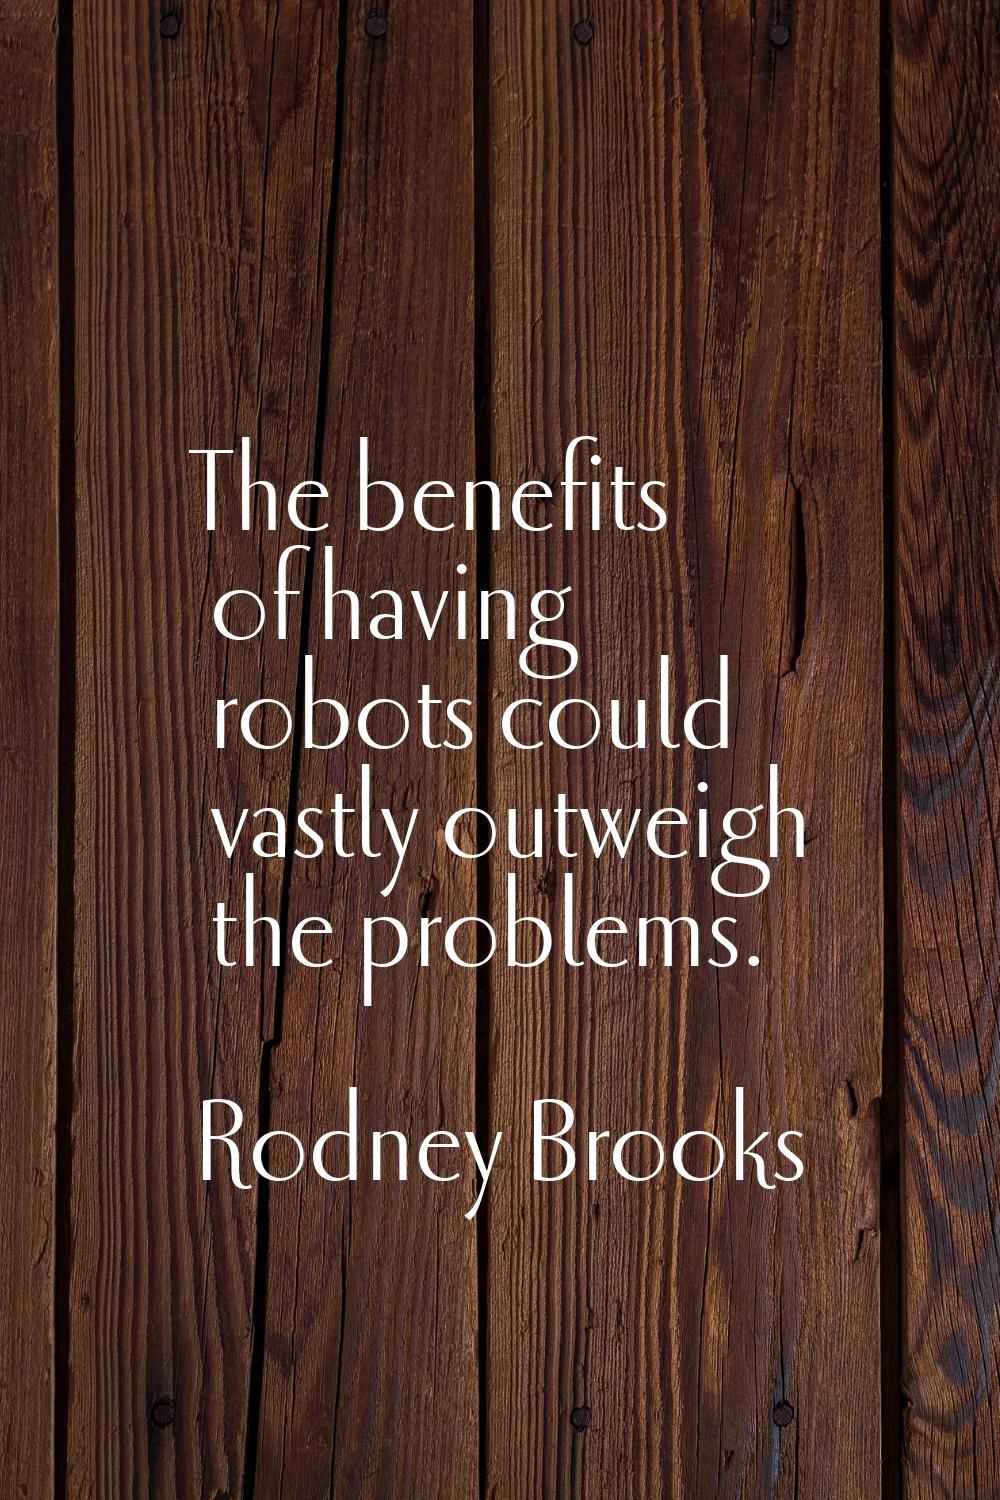 The benefits of having robots could vastly outweigh the problems.